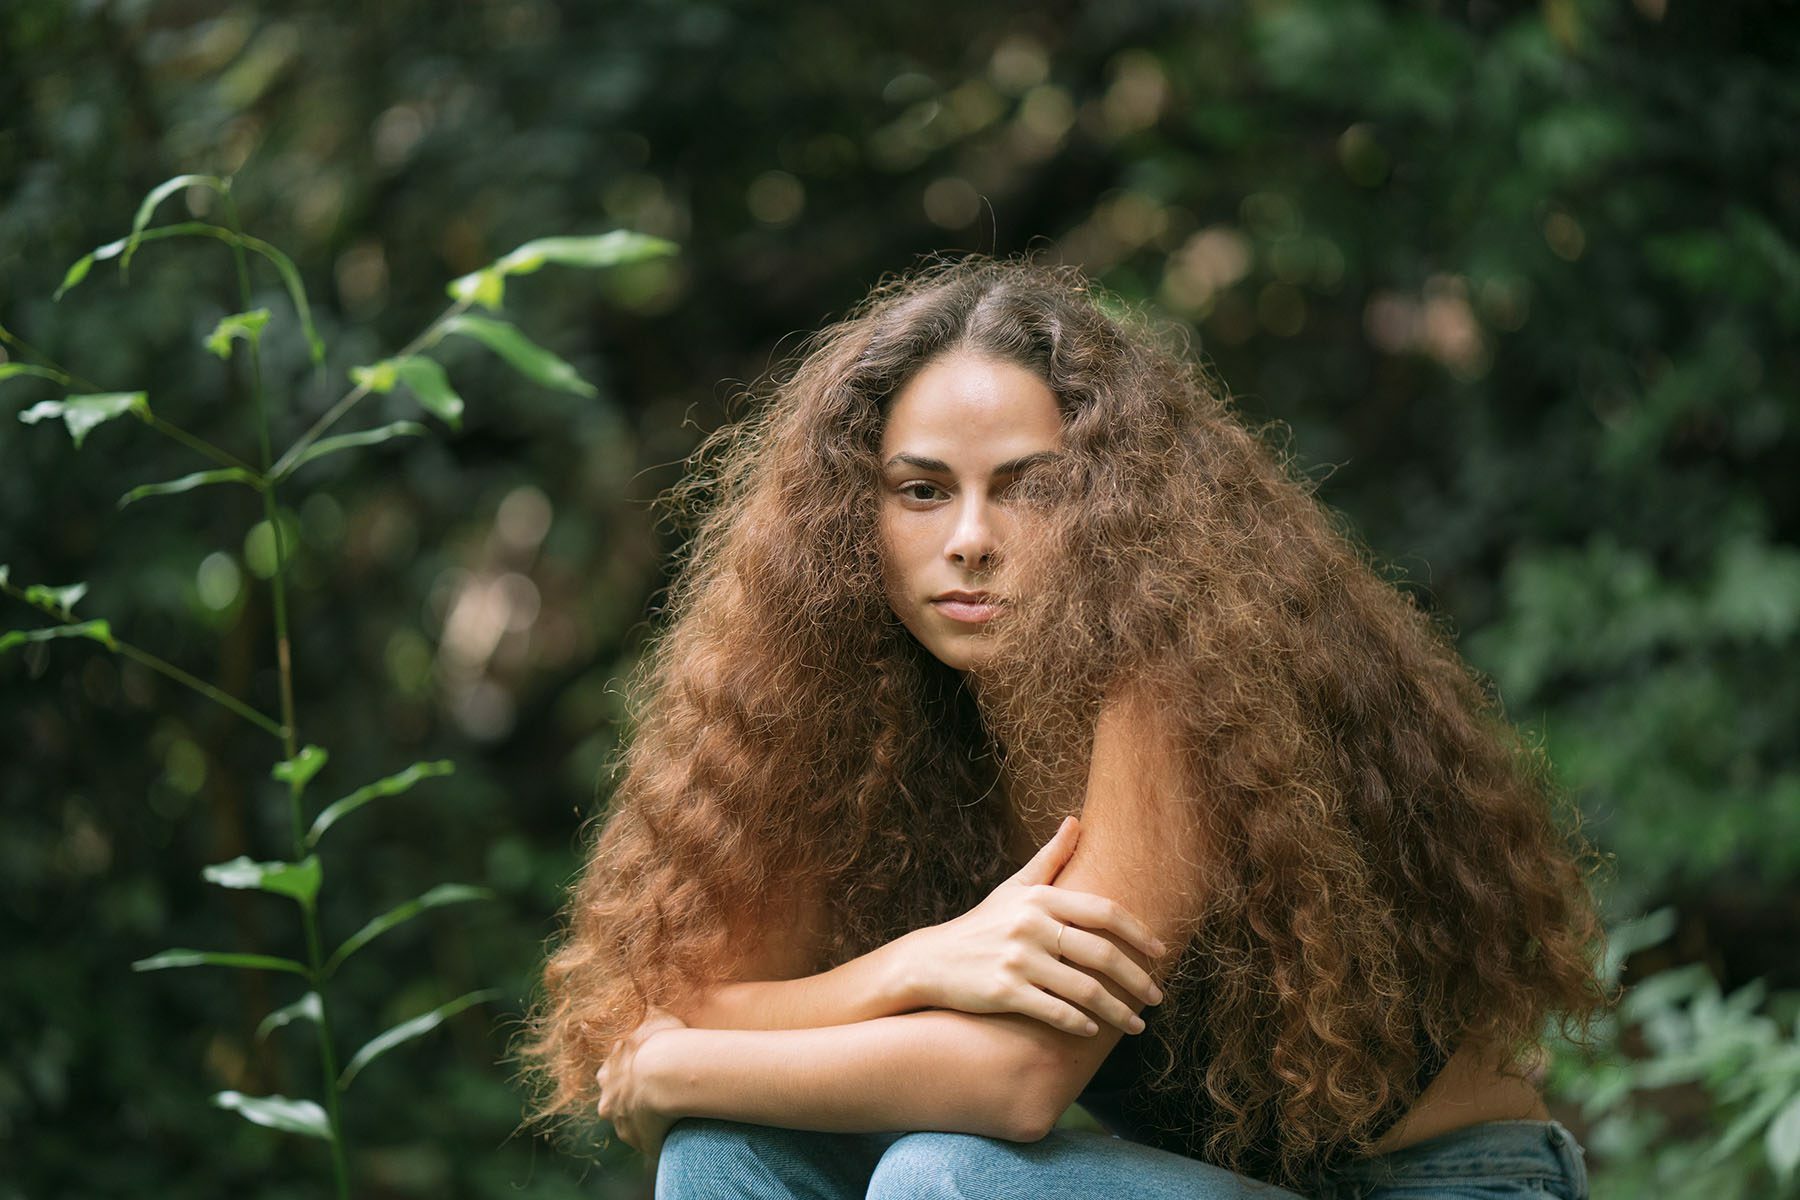 Sage Lenier poses for a portrait in a jungle in Honolulu, Hawaii